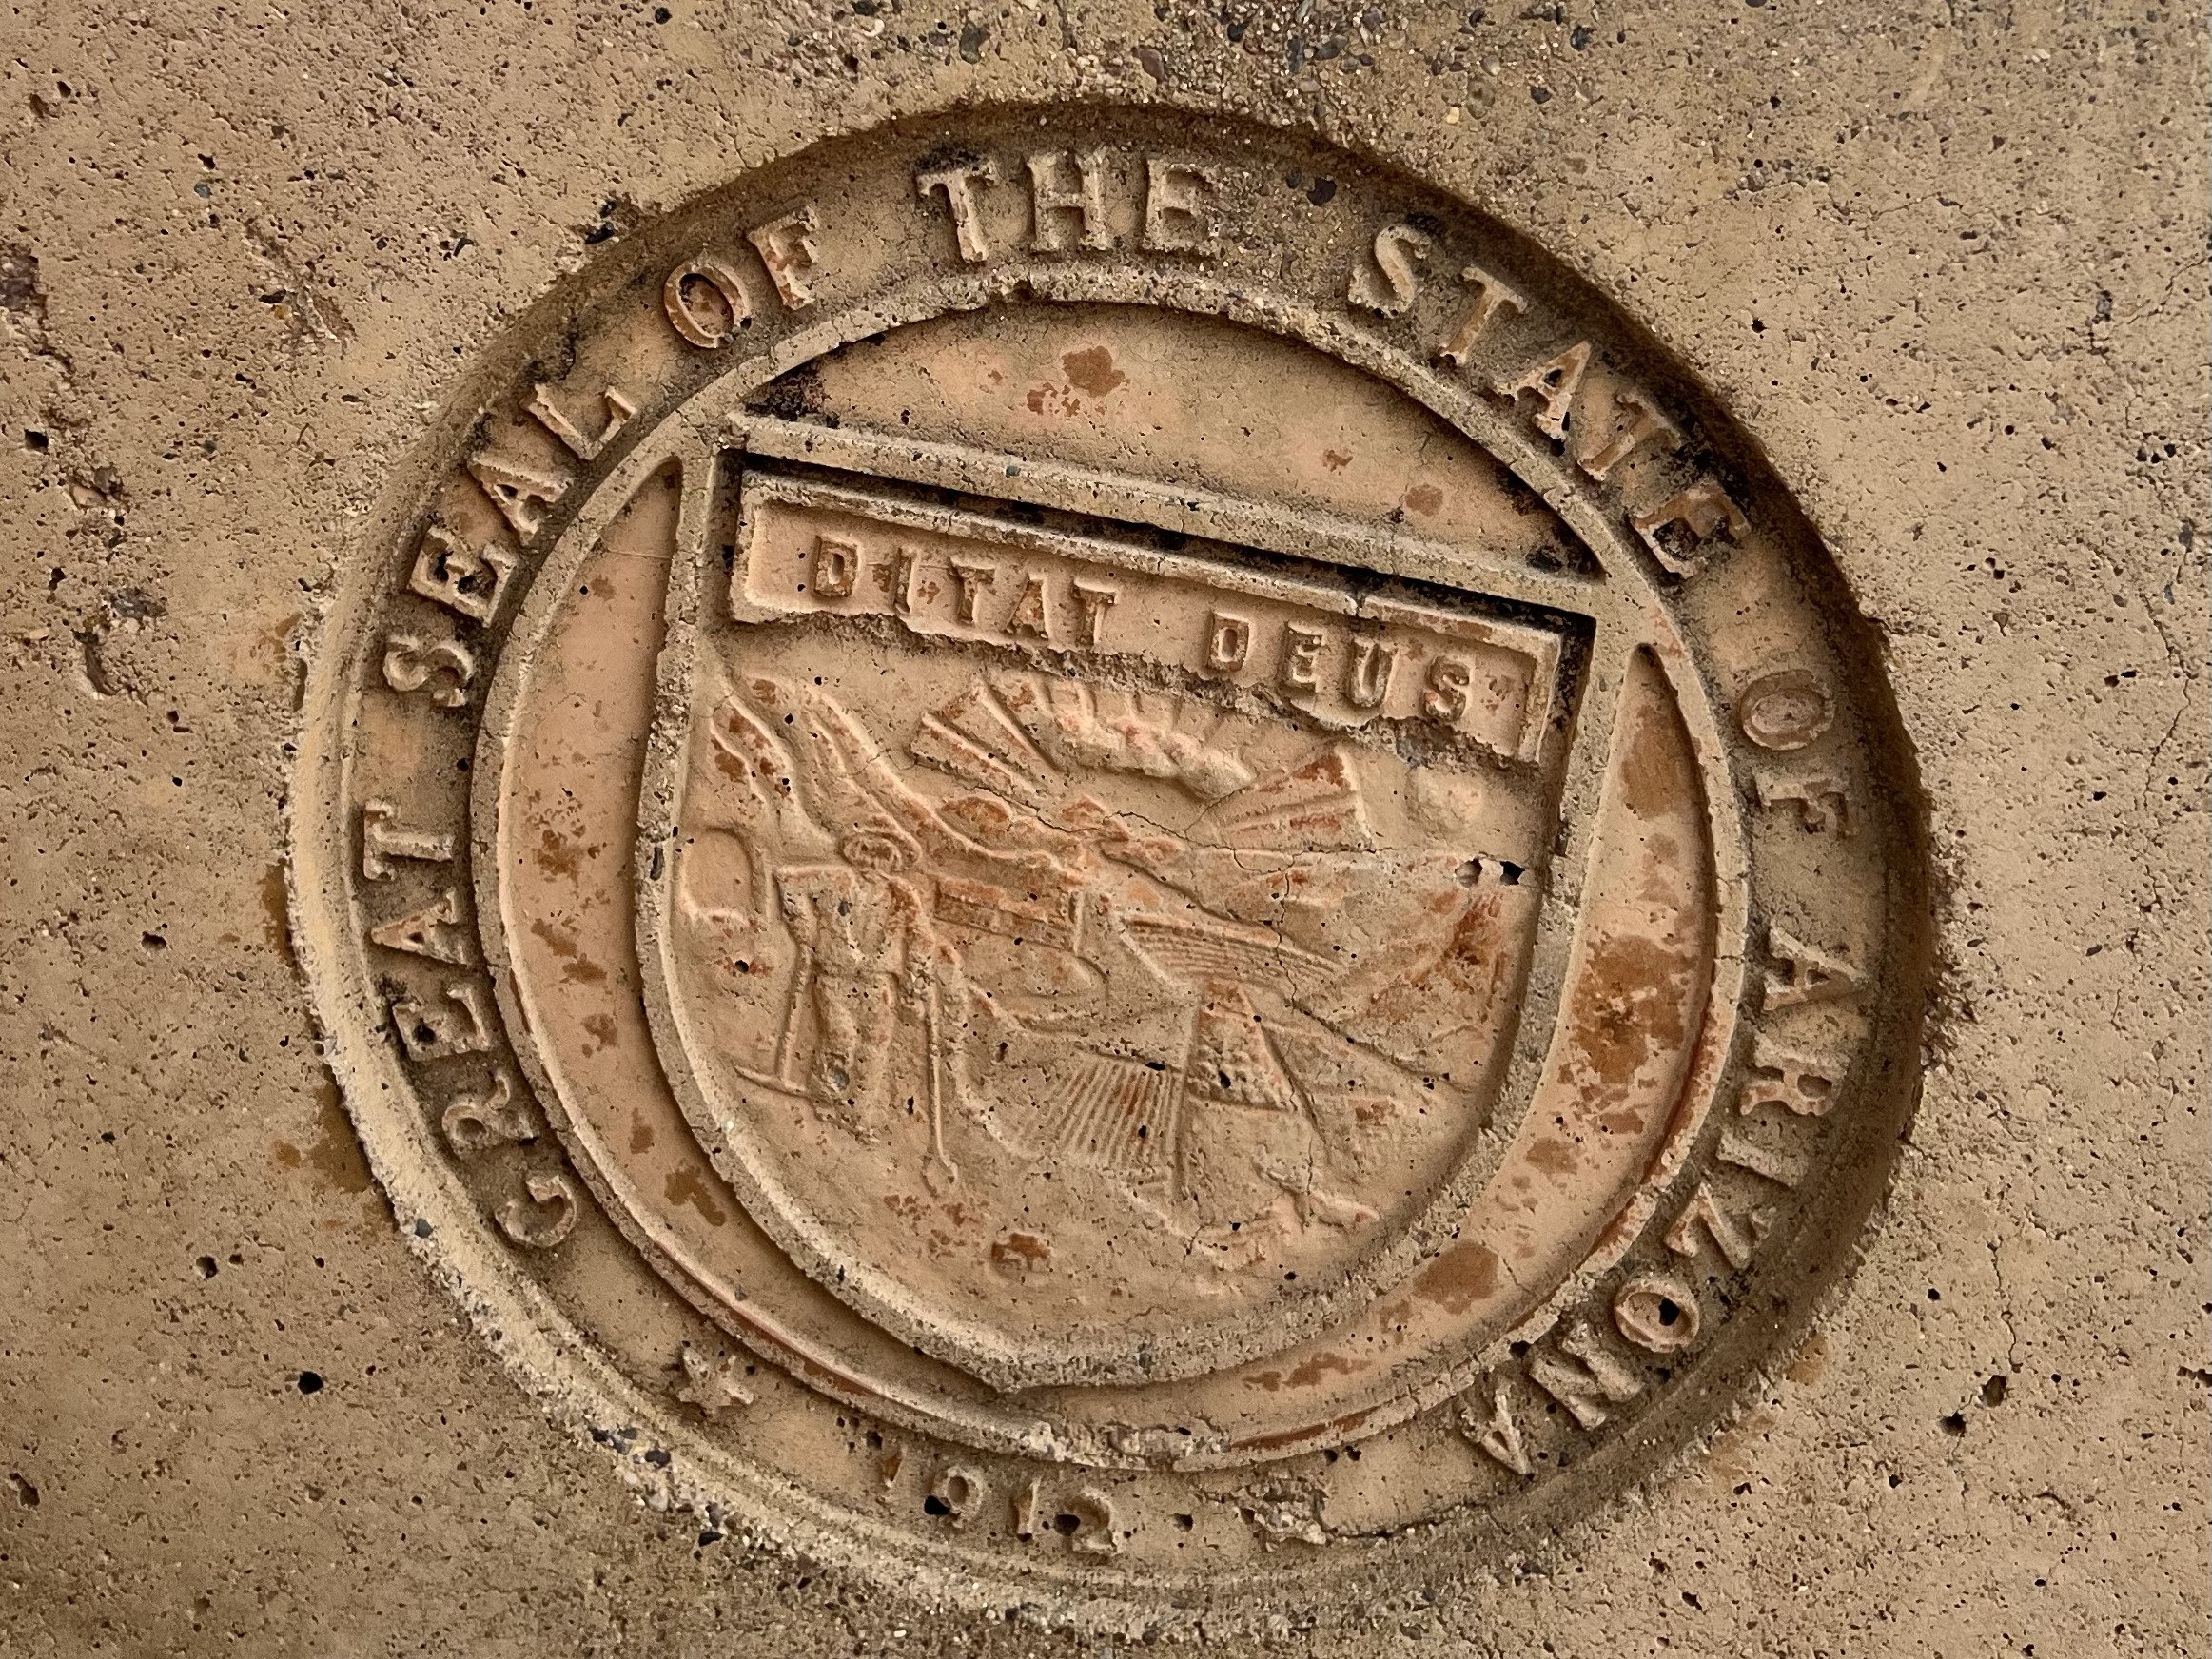  The seal of the great state of Arizona includes the memorable phrase,  Ditat Deus , meaning God enriches. 